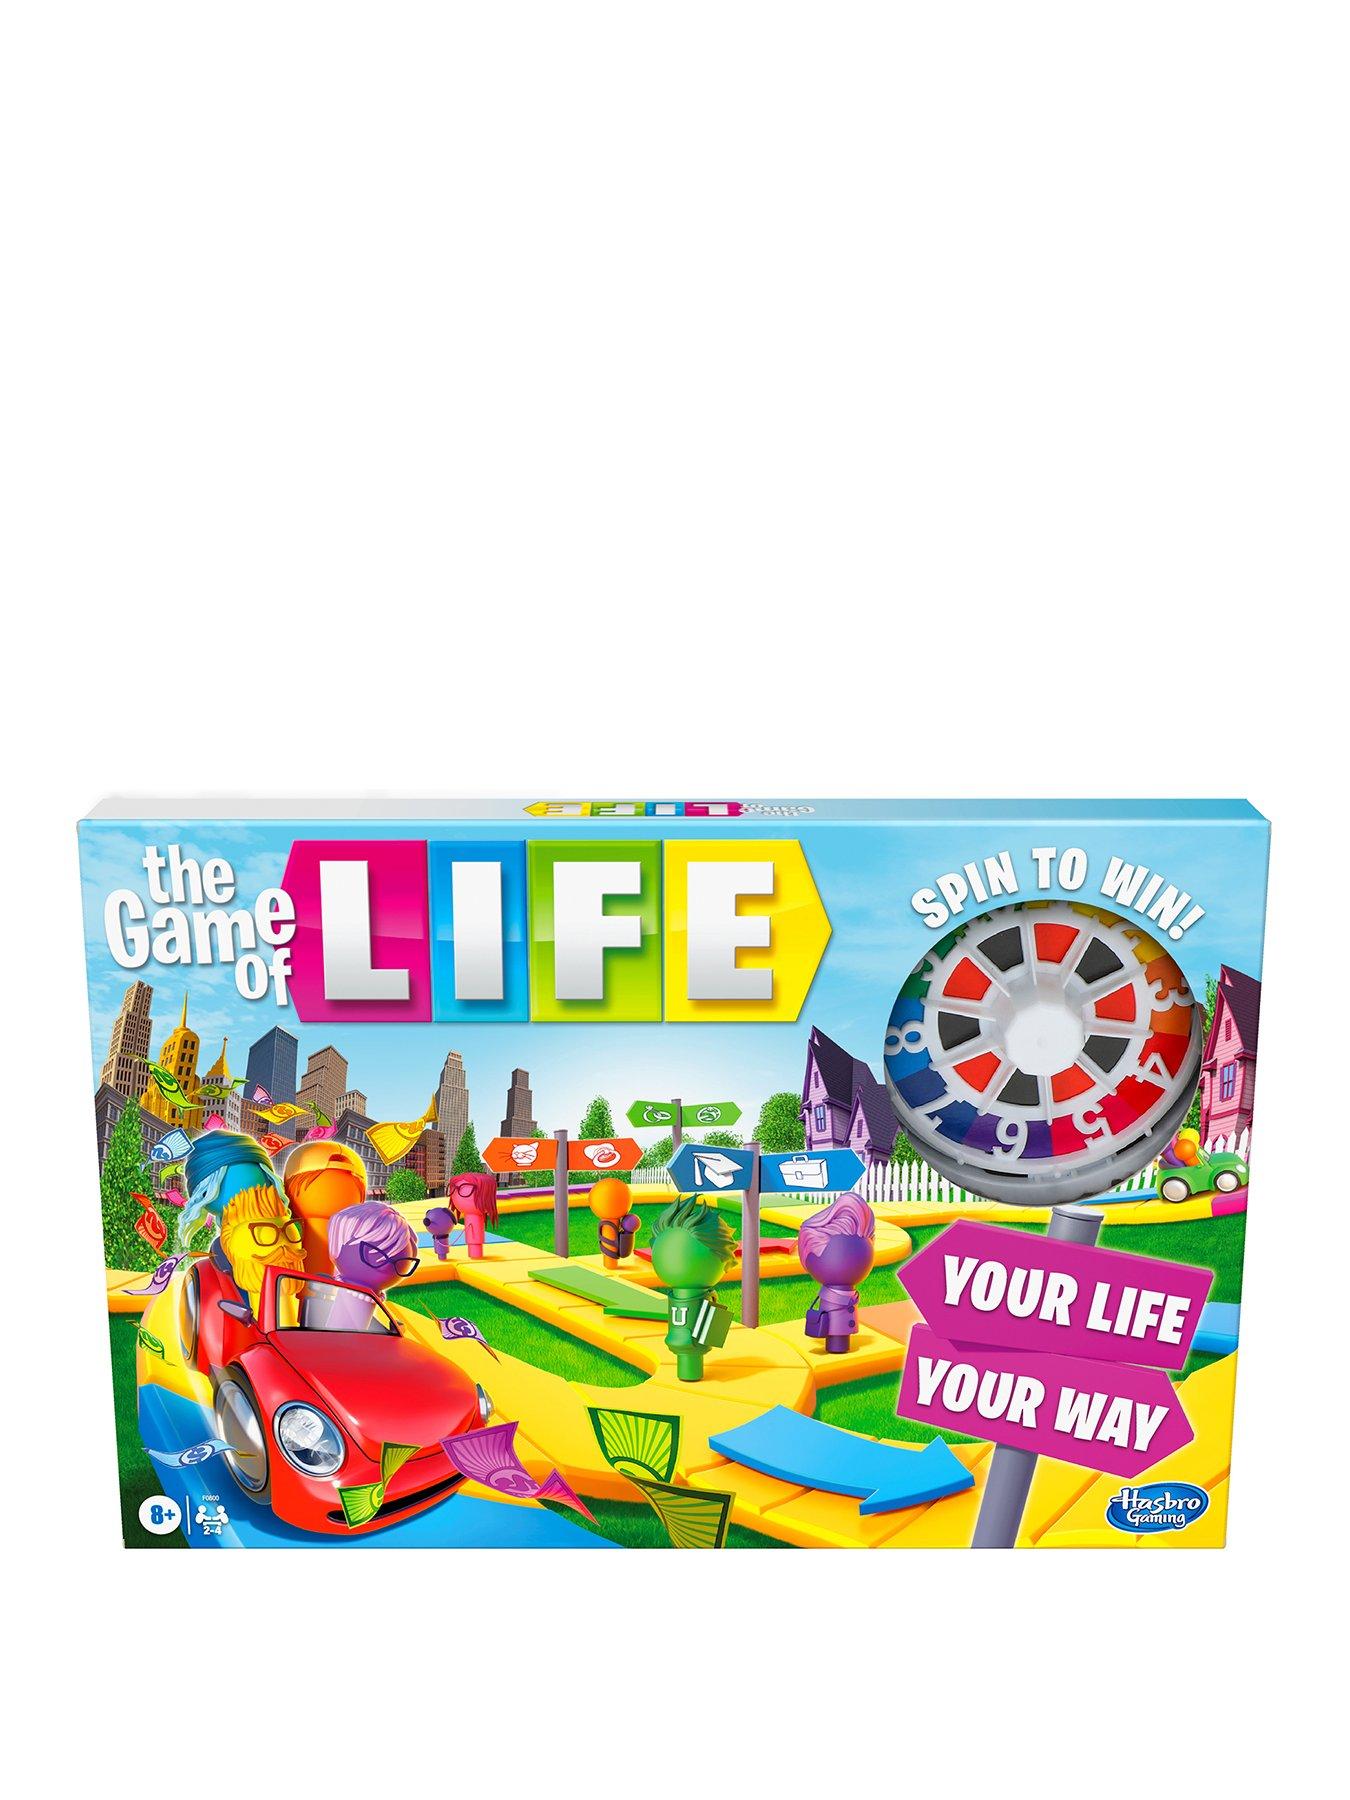 The Twists and Turns of the Game of Life IRL